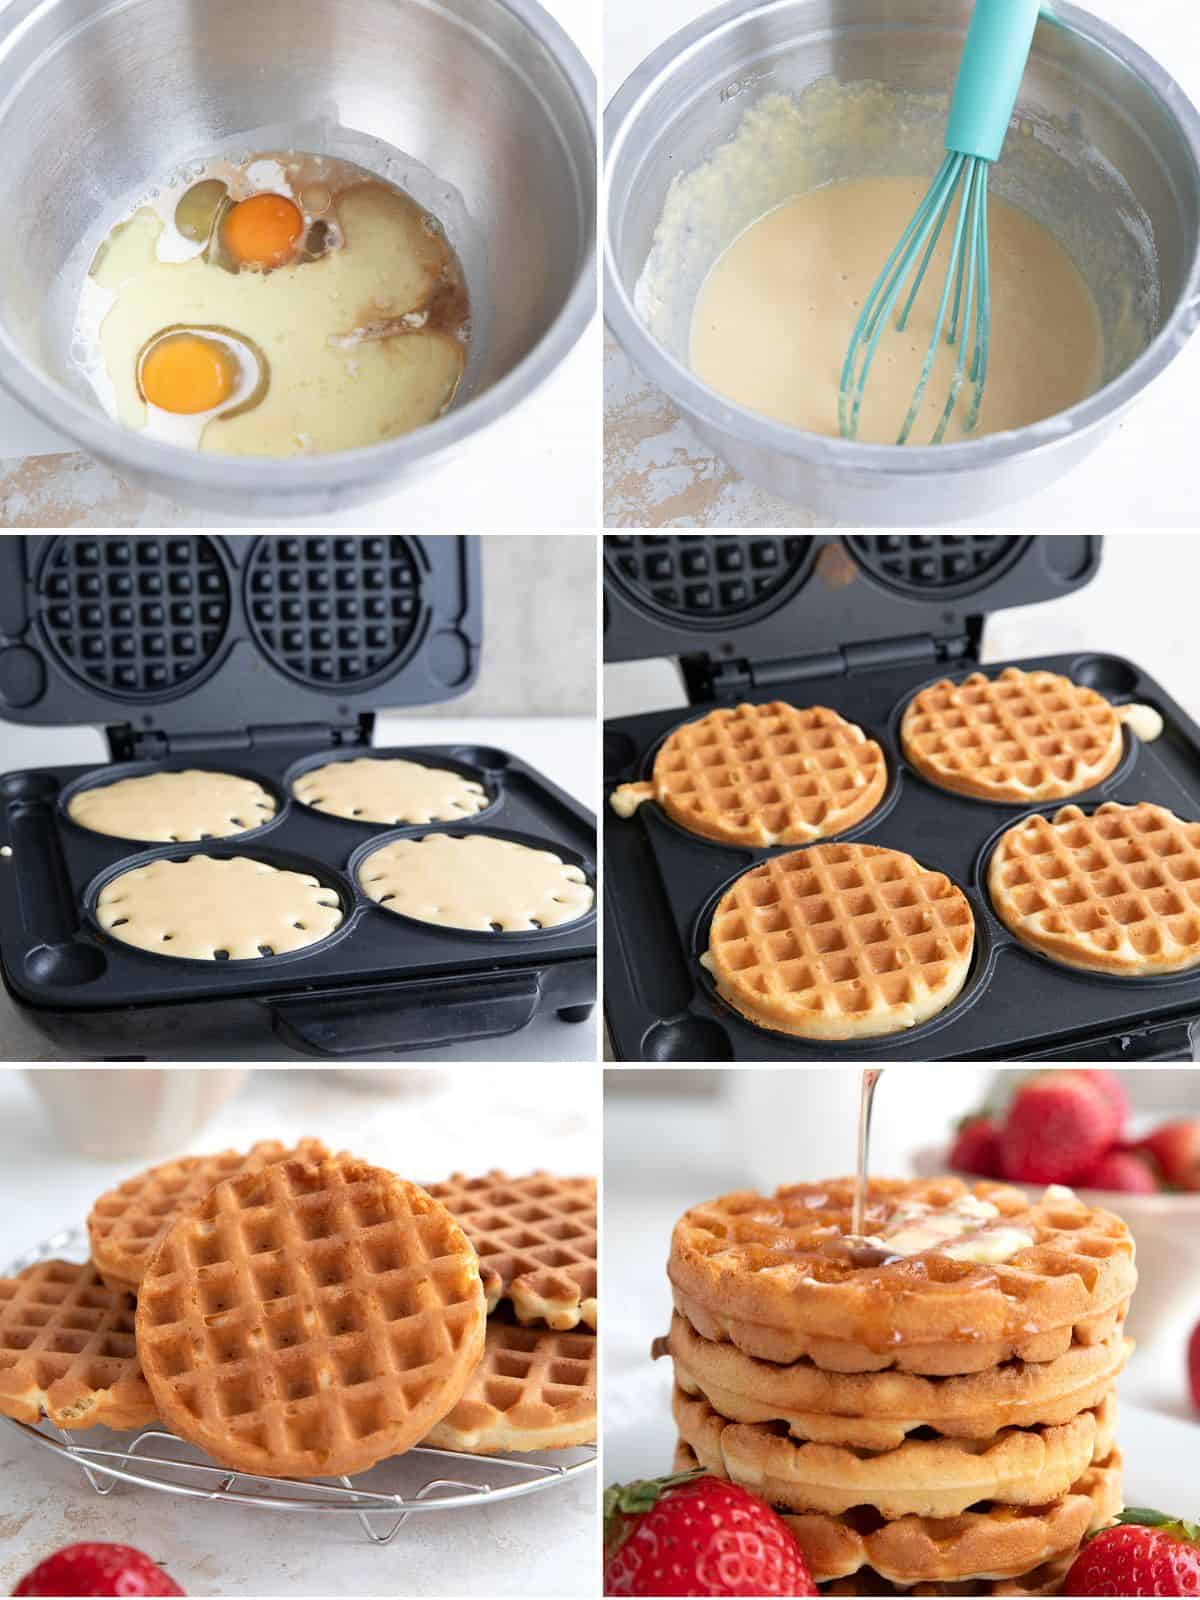 A collage of 6 images showing how to make keto waffles.